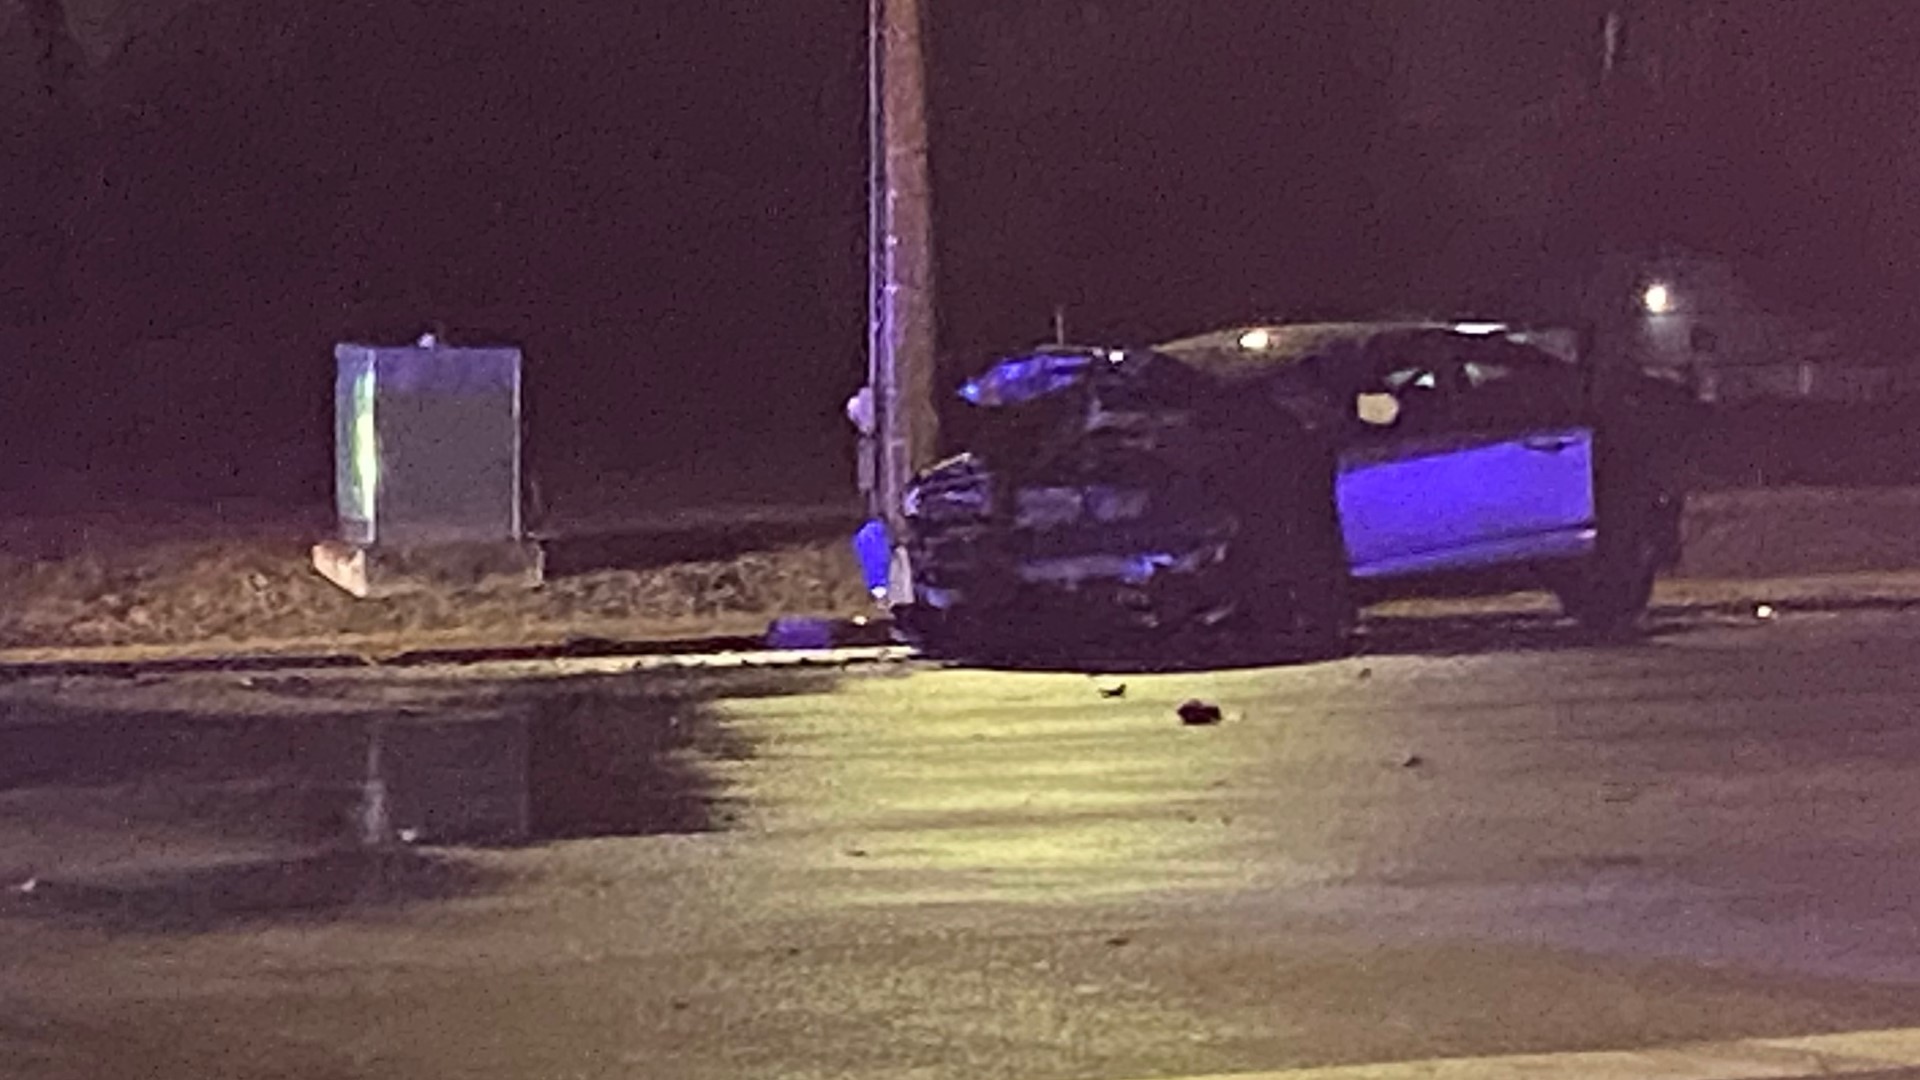 Investigators say the suspected drunk driver ran a red light. Witnesses told police the driver was going extremely fast and had his flashers on.